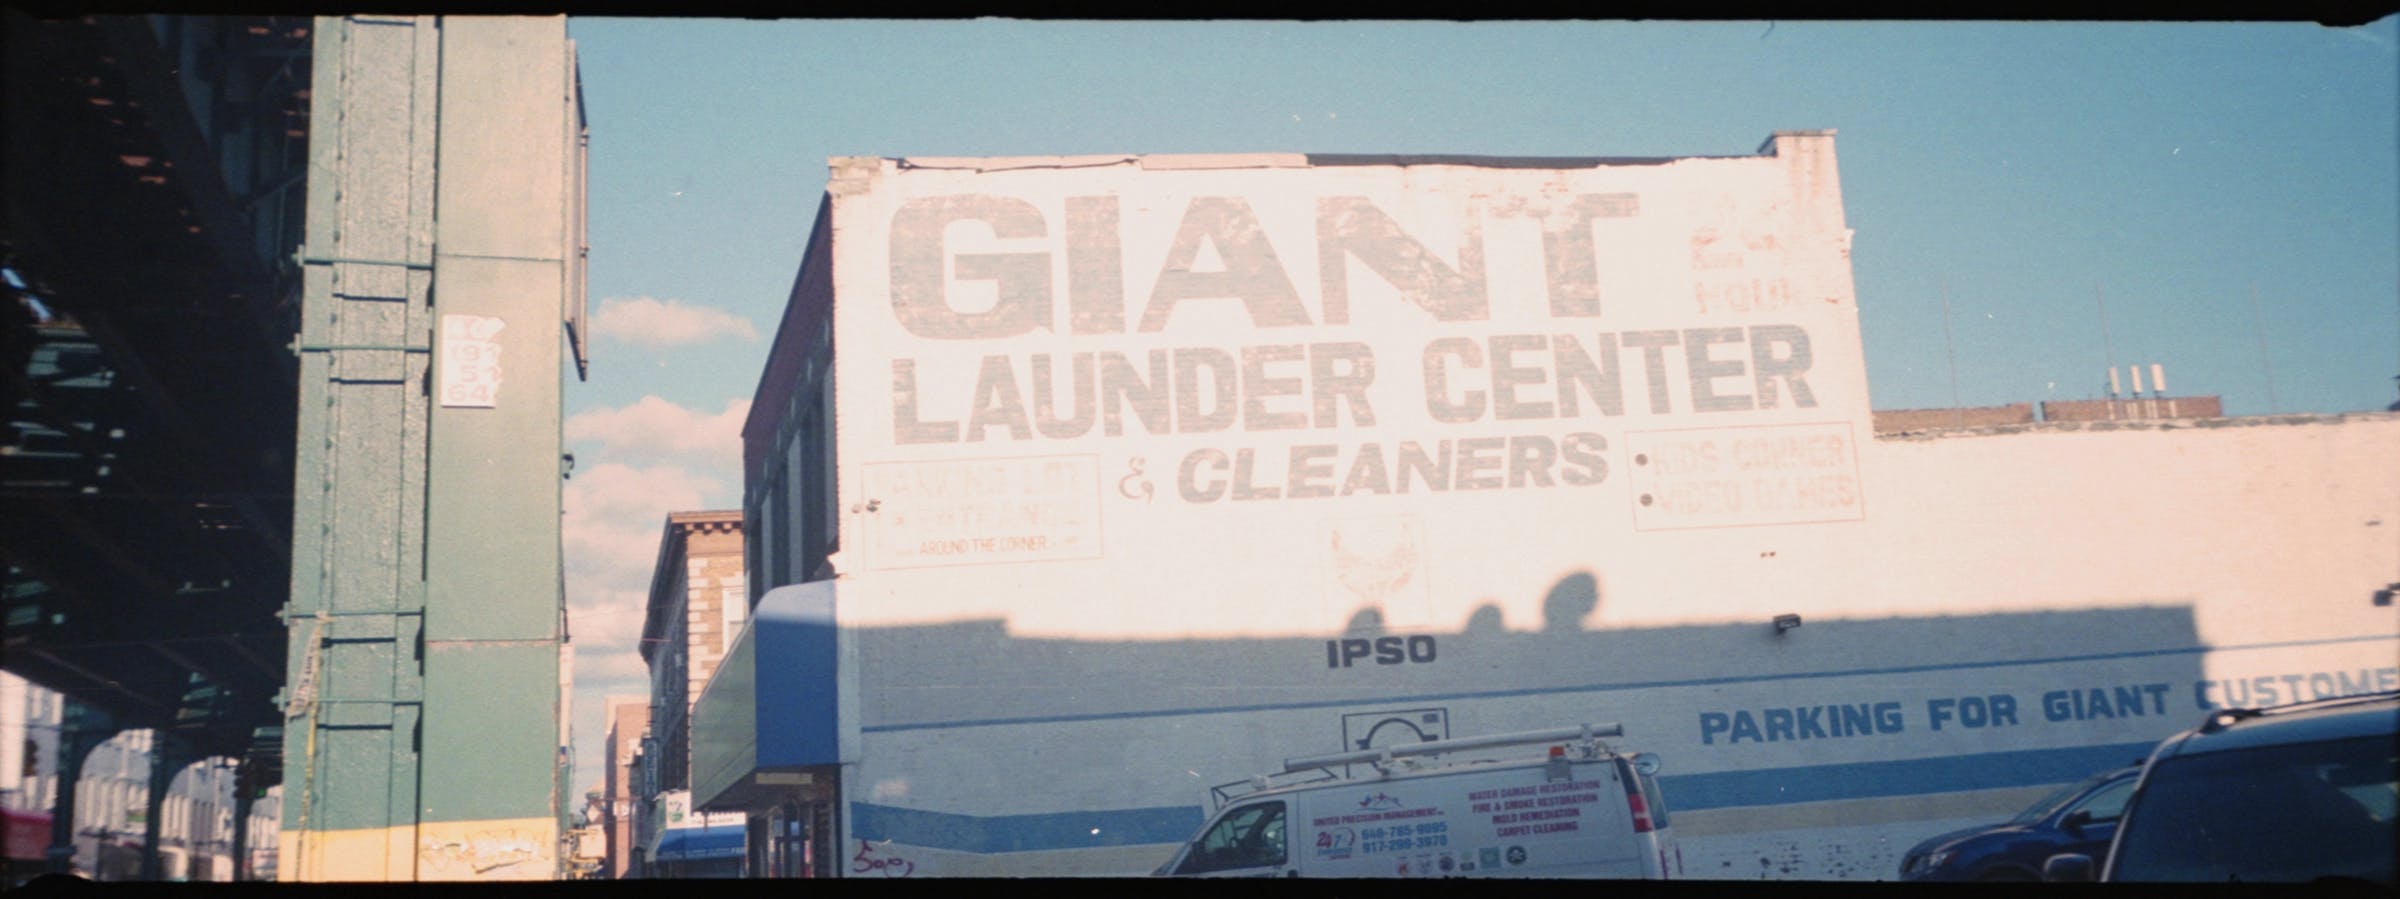 Giant Launder Center (and cleaners)